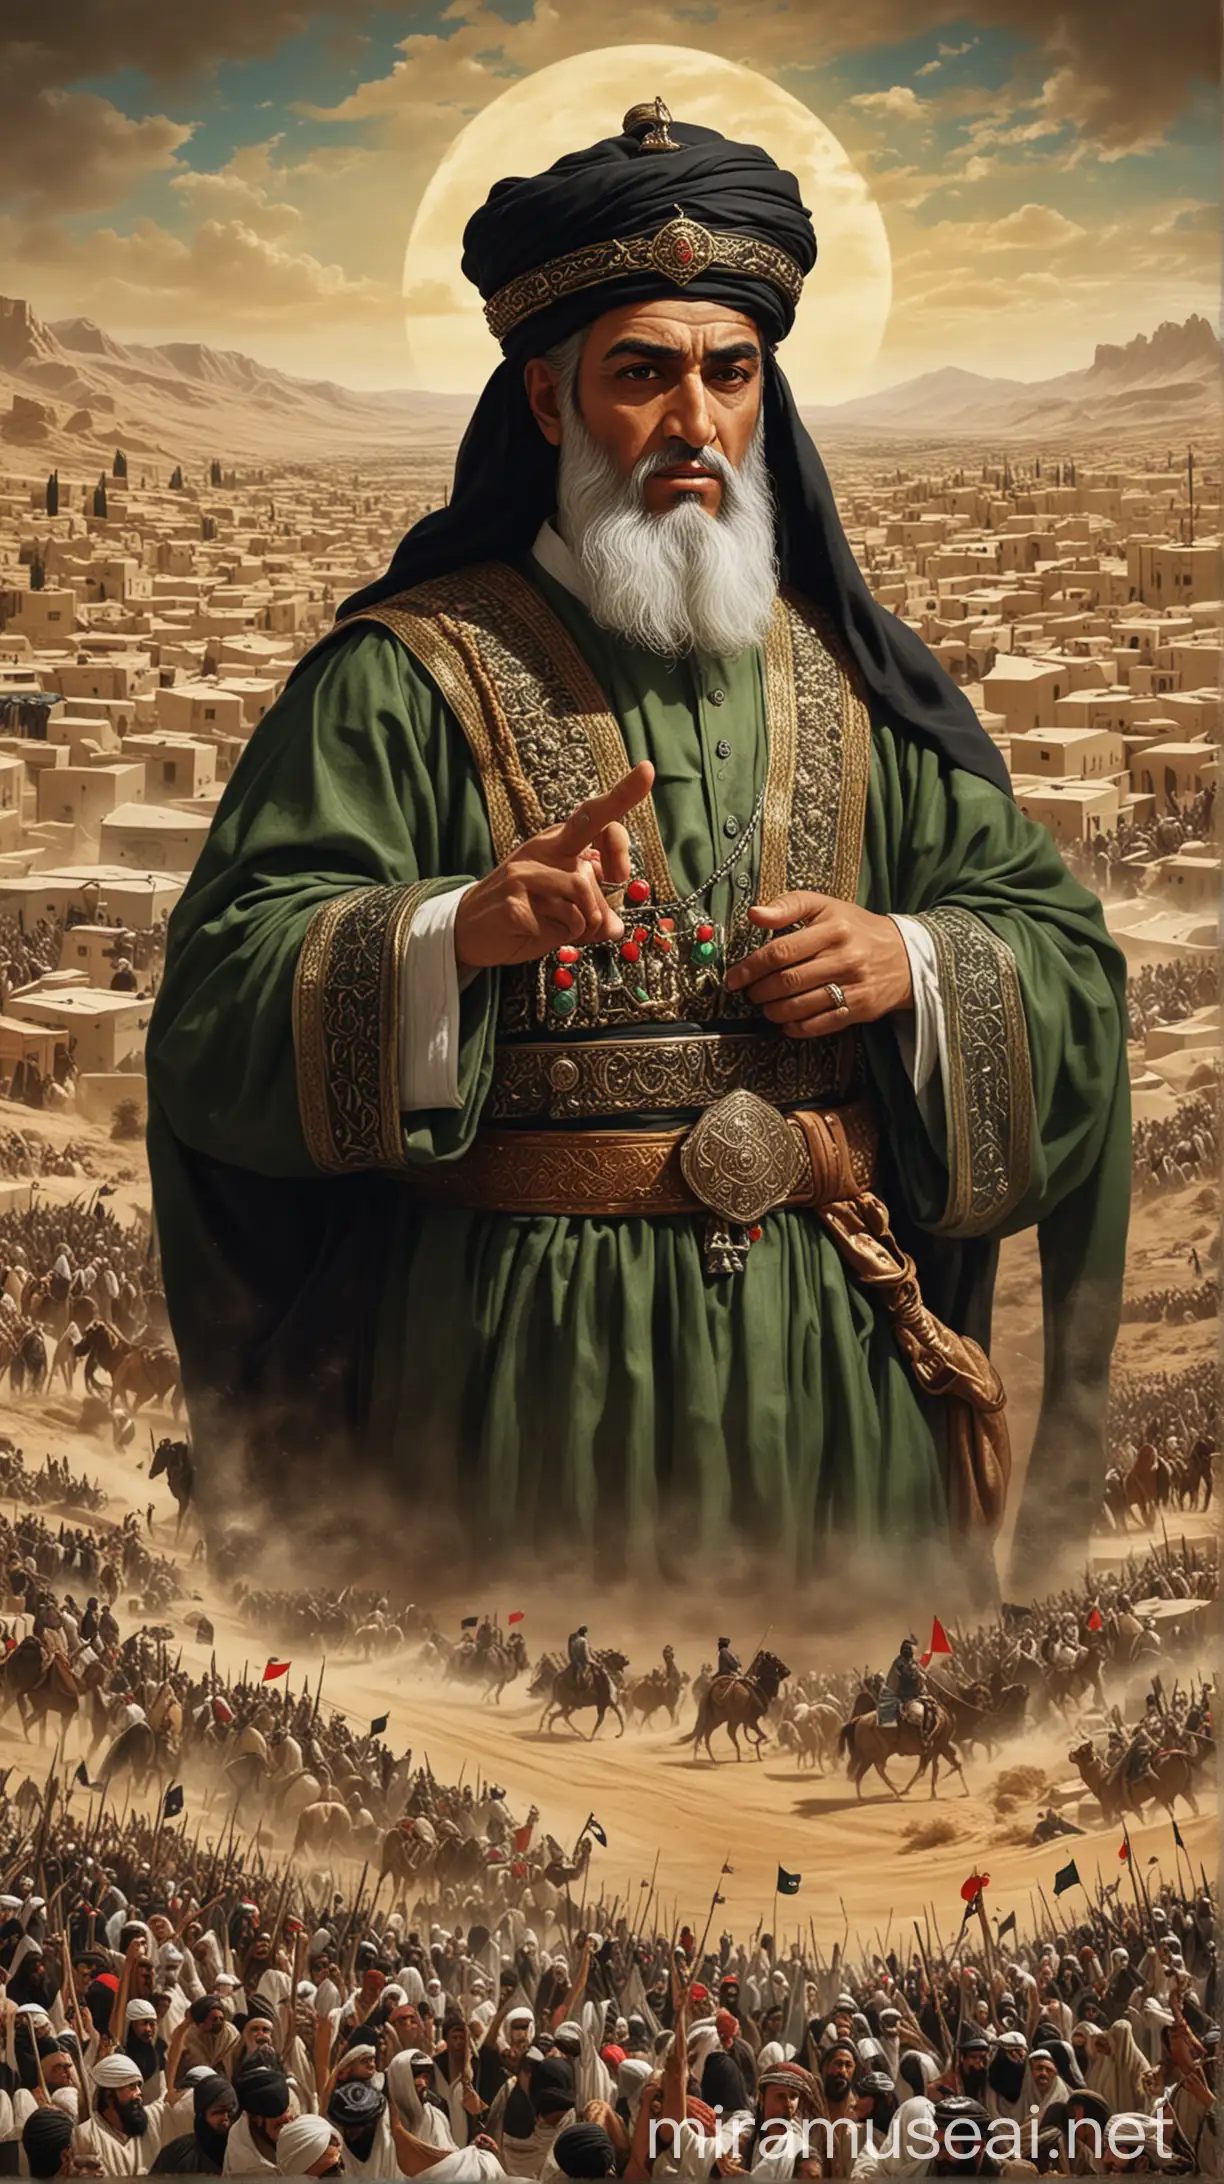 Caliph Umar I Commander of the Faithful and Expansion of Arab Territories